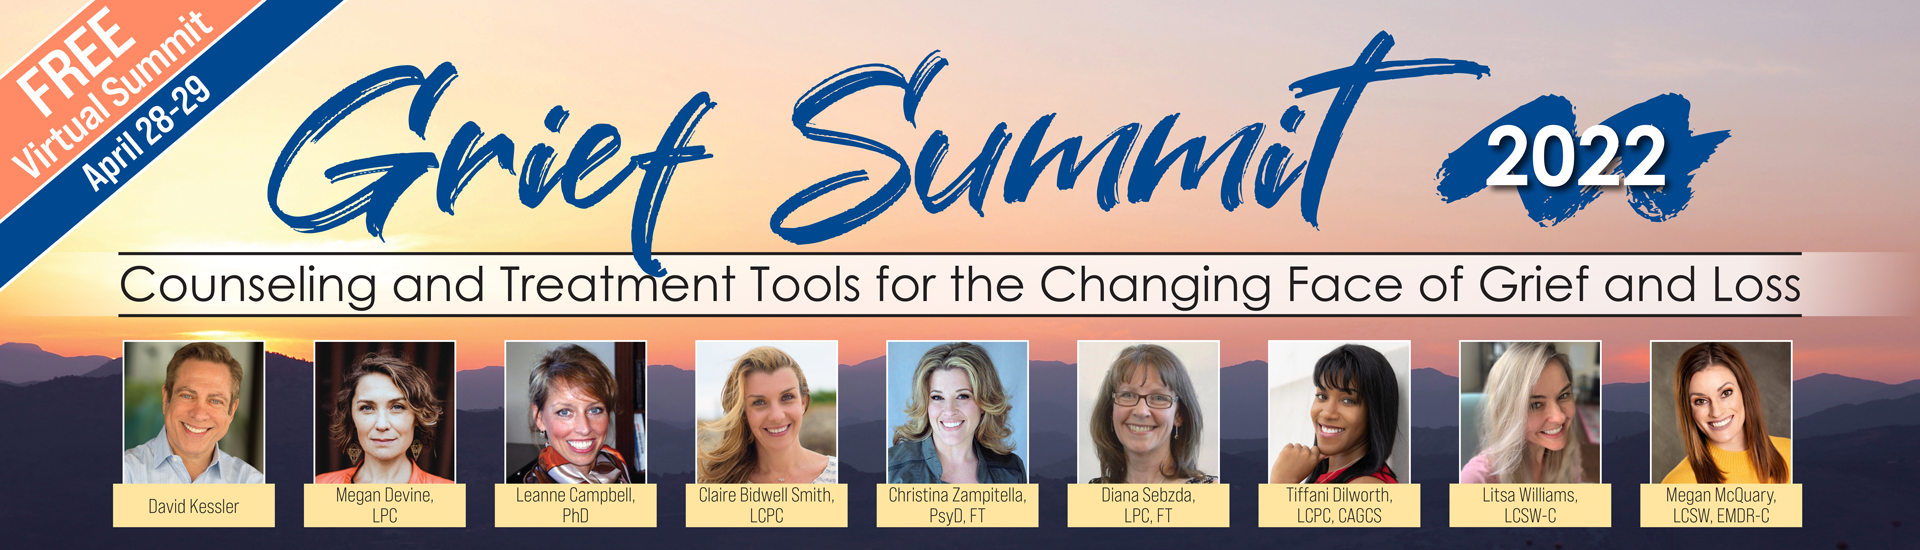 2nd Annual Virtual Grief Summit April 28th & 29th from 9:00 AM - 4:40 PM CDT